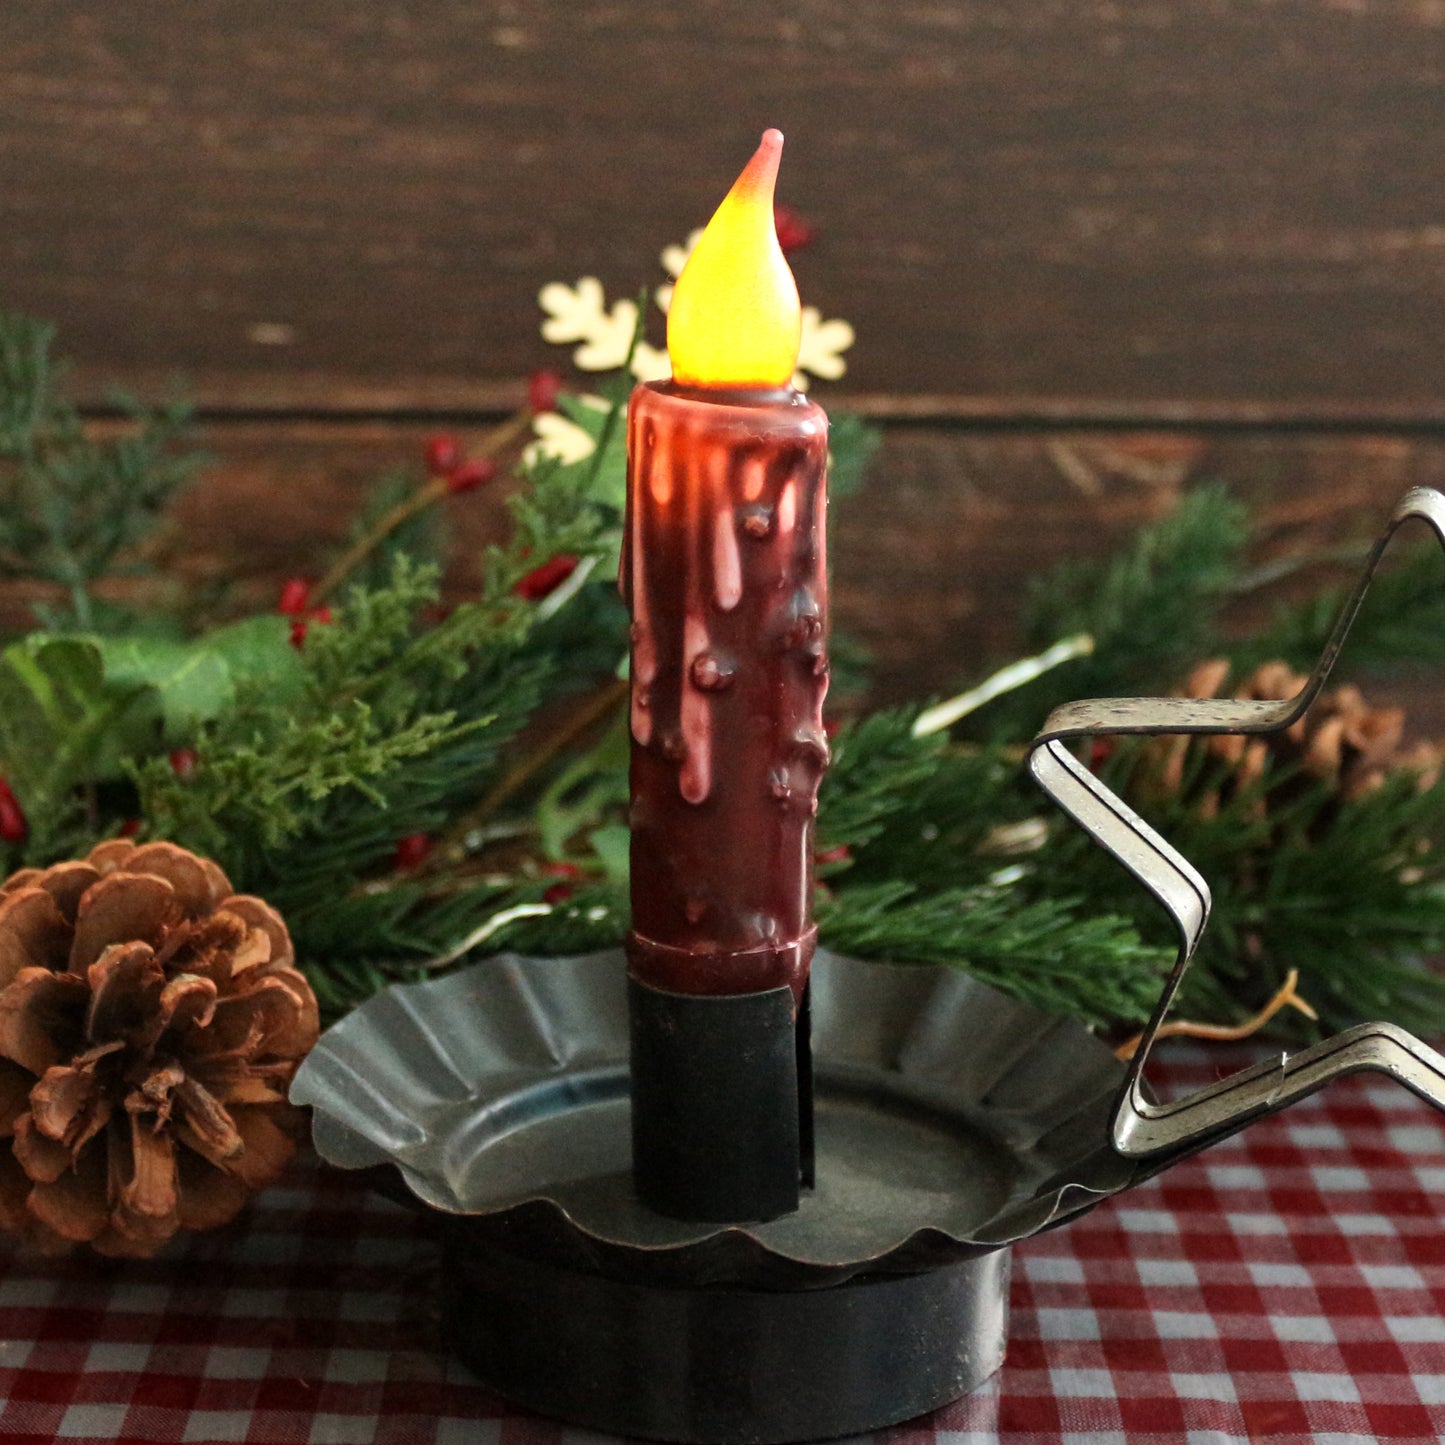 CVHOMEDECO. Real Wax Hand Dipped Battery Operated LED Timer Taper Candles Rustic Primitive Flameless Lights Décor, 4.75 Inch, Burgundy, 6 PCS in a Package